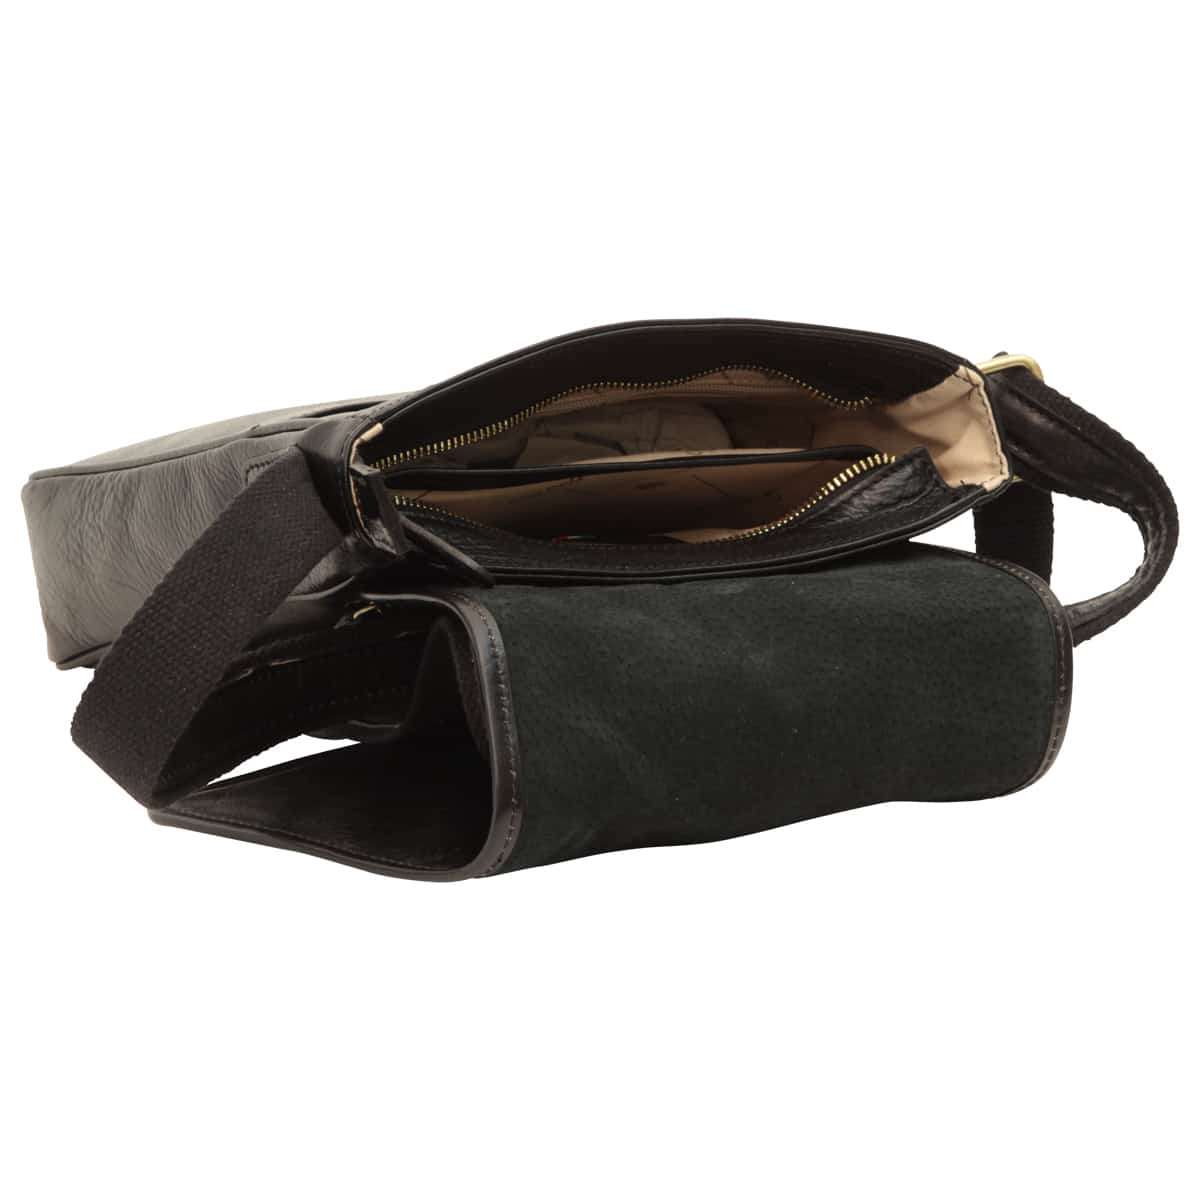 Small leather bag with magnetic closure - Black | 406689NE US | Old Angler Firenze